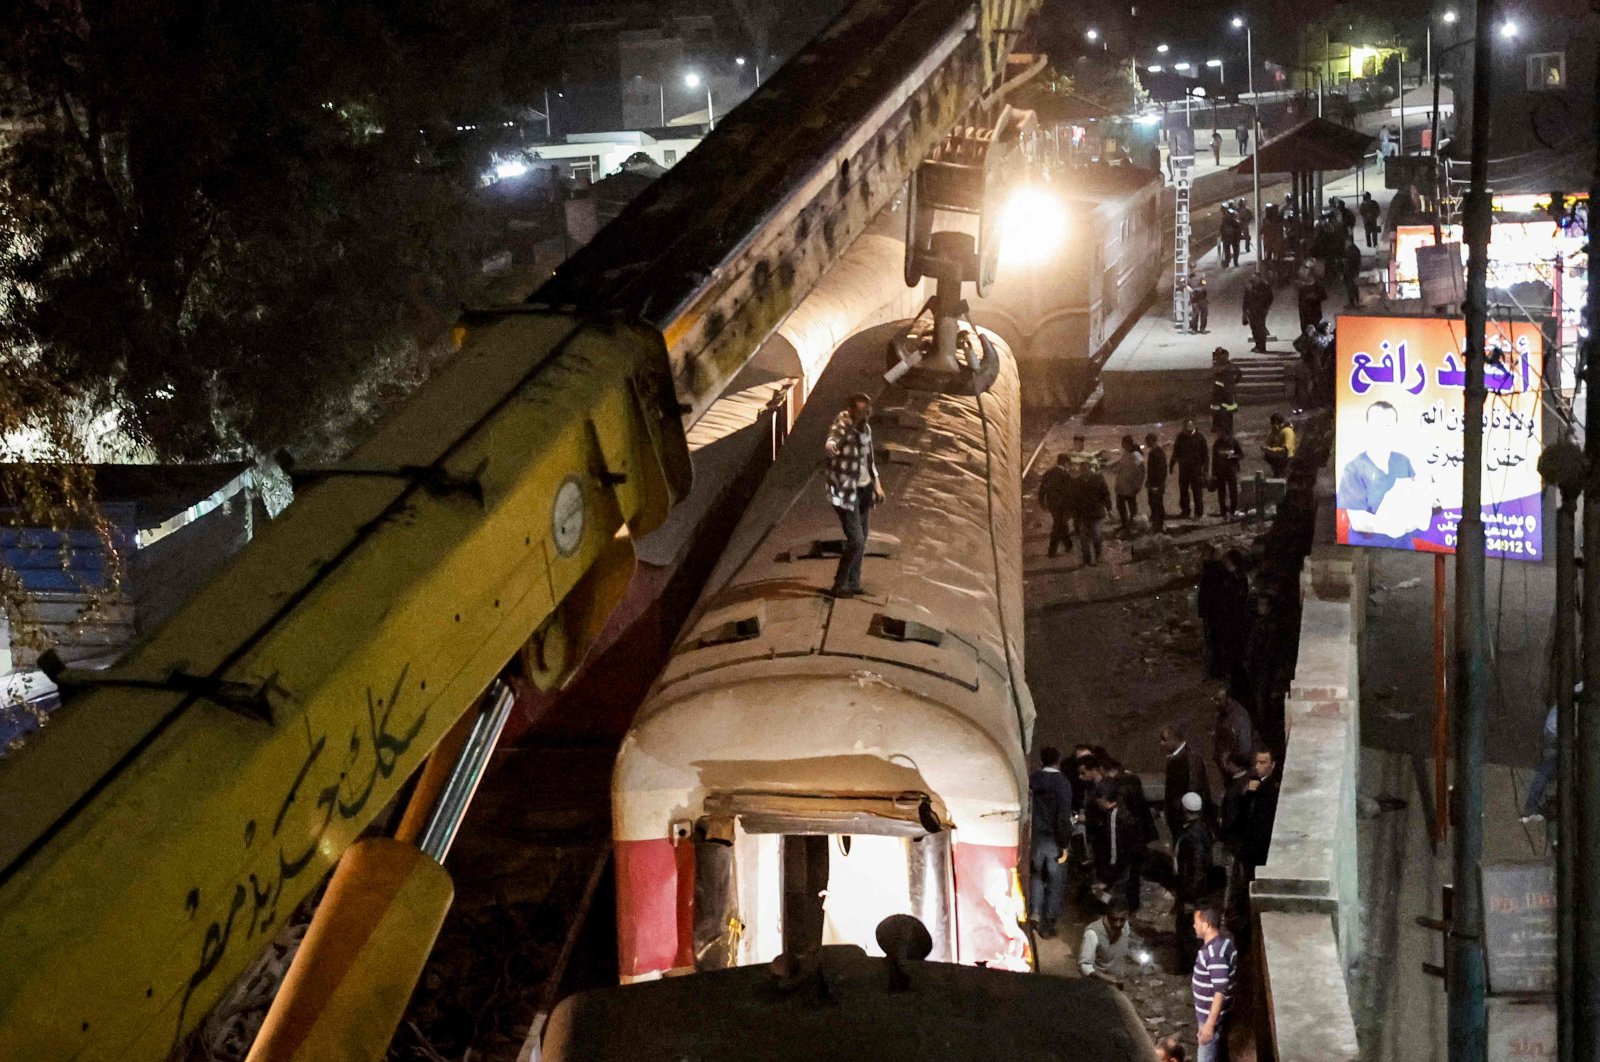 A crane is deployed to lift a derailed train at the scene of a railroad accident in the city of Qalyub in Qalyub province, Egypt, March 7, 2023. (AFP Photo)